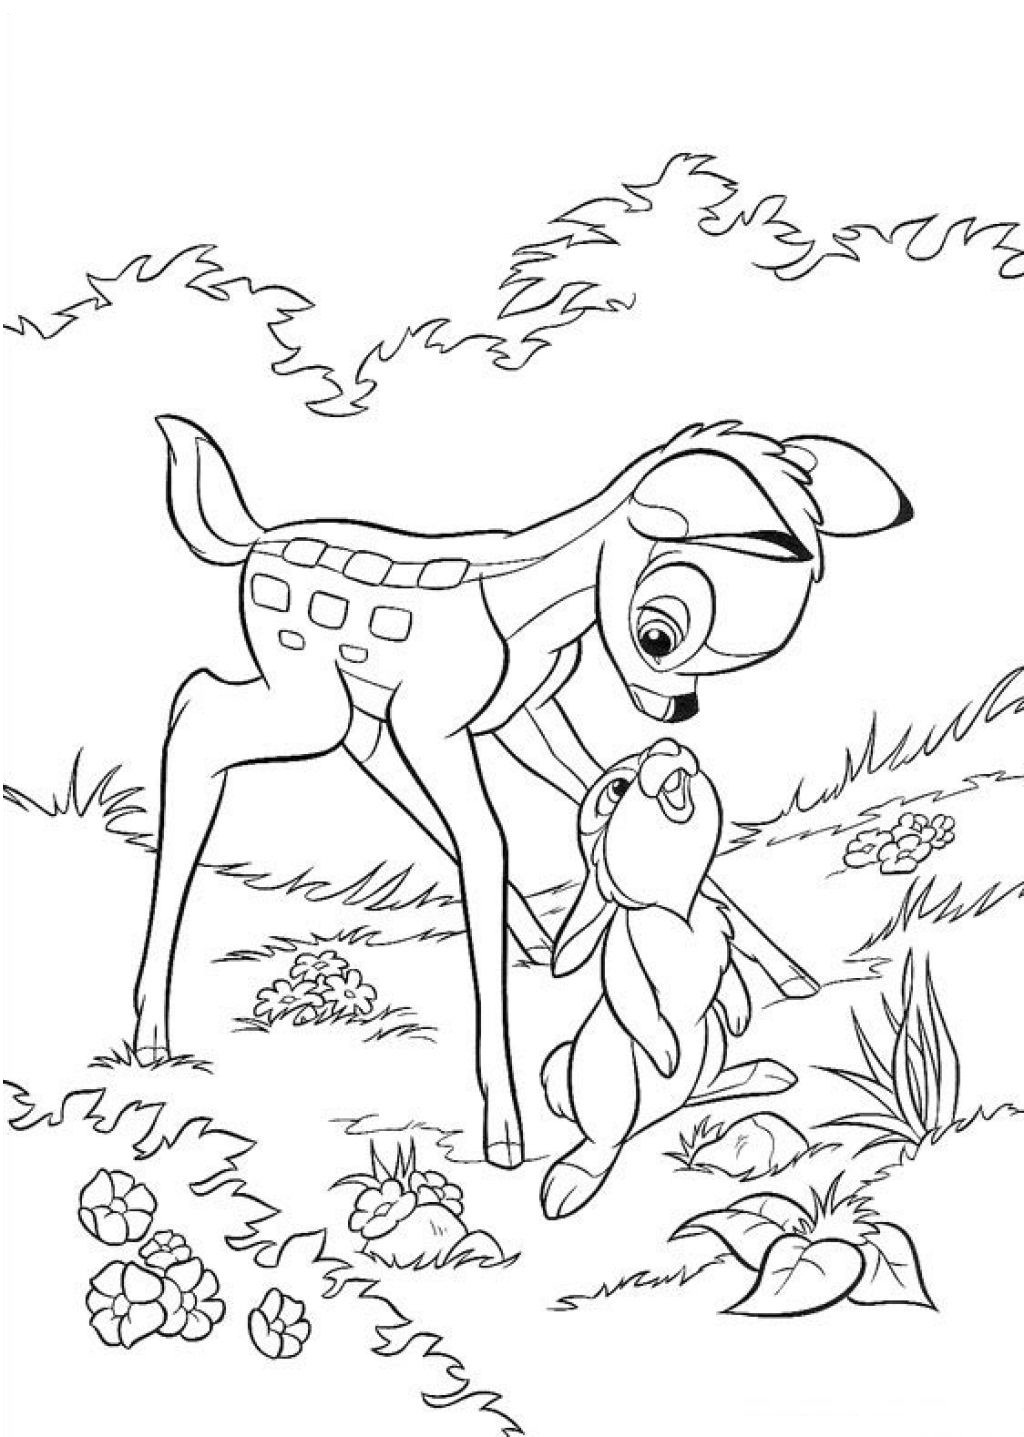 Bambi Coloring Pages
 Free Printable Bambi Coloring Pages For Kids